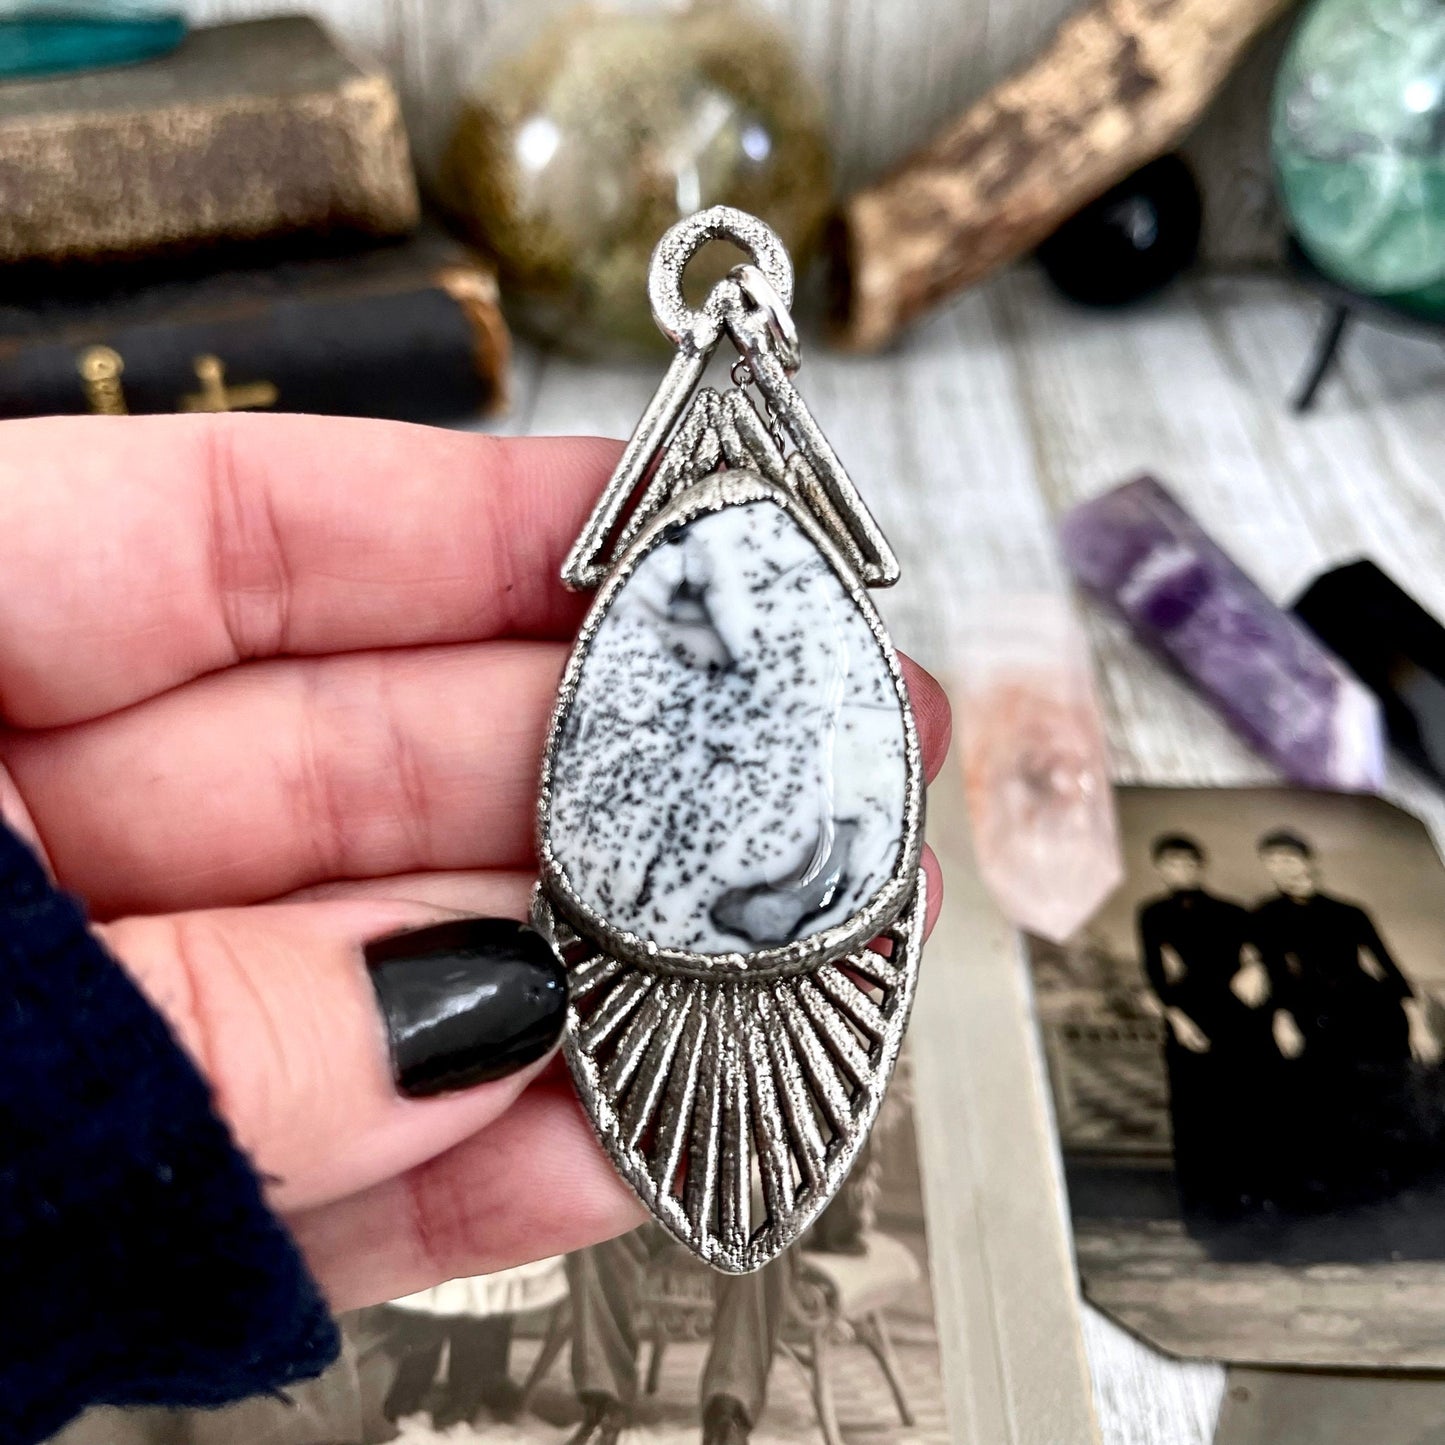 Big Crystal Necklace, Big Stone Necklace, Bohemian Jewelry, Crystal Necklaces, Etsy ID: 1556757320, Foxlark Alchemy, FOXLARK- NECKLACES, Gothic Jewelry, Jewelry, Large Crystal, Large Raw Crystal, layering necklace, Necklaces, Raw crystal jewelry, raw crys